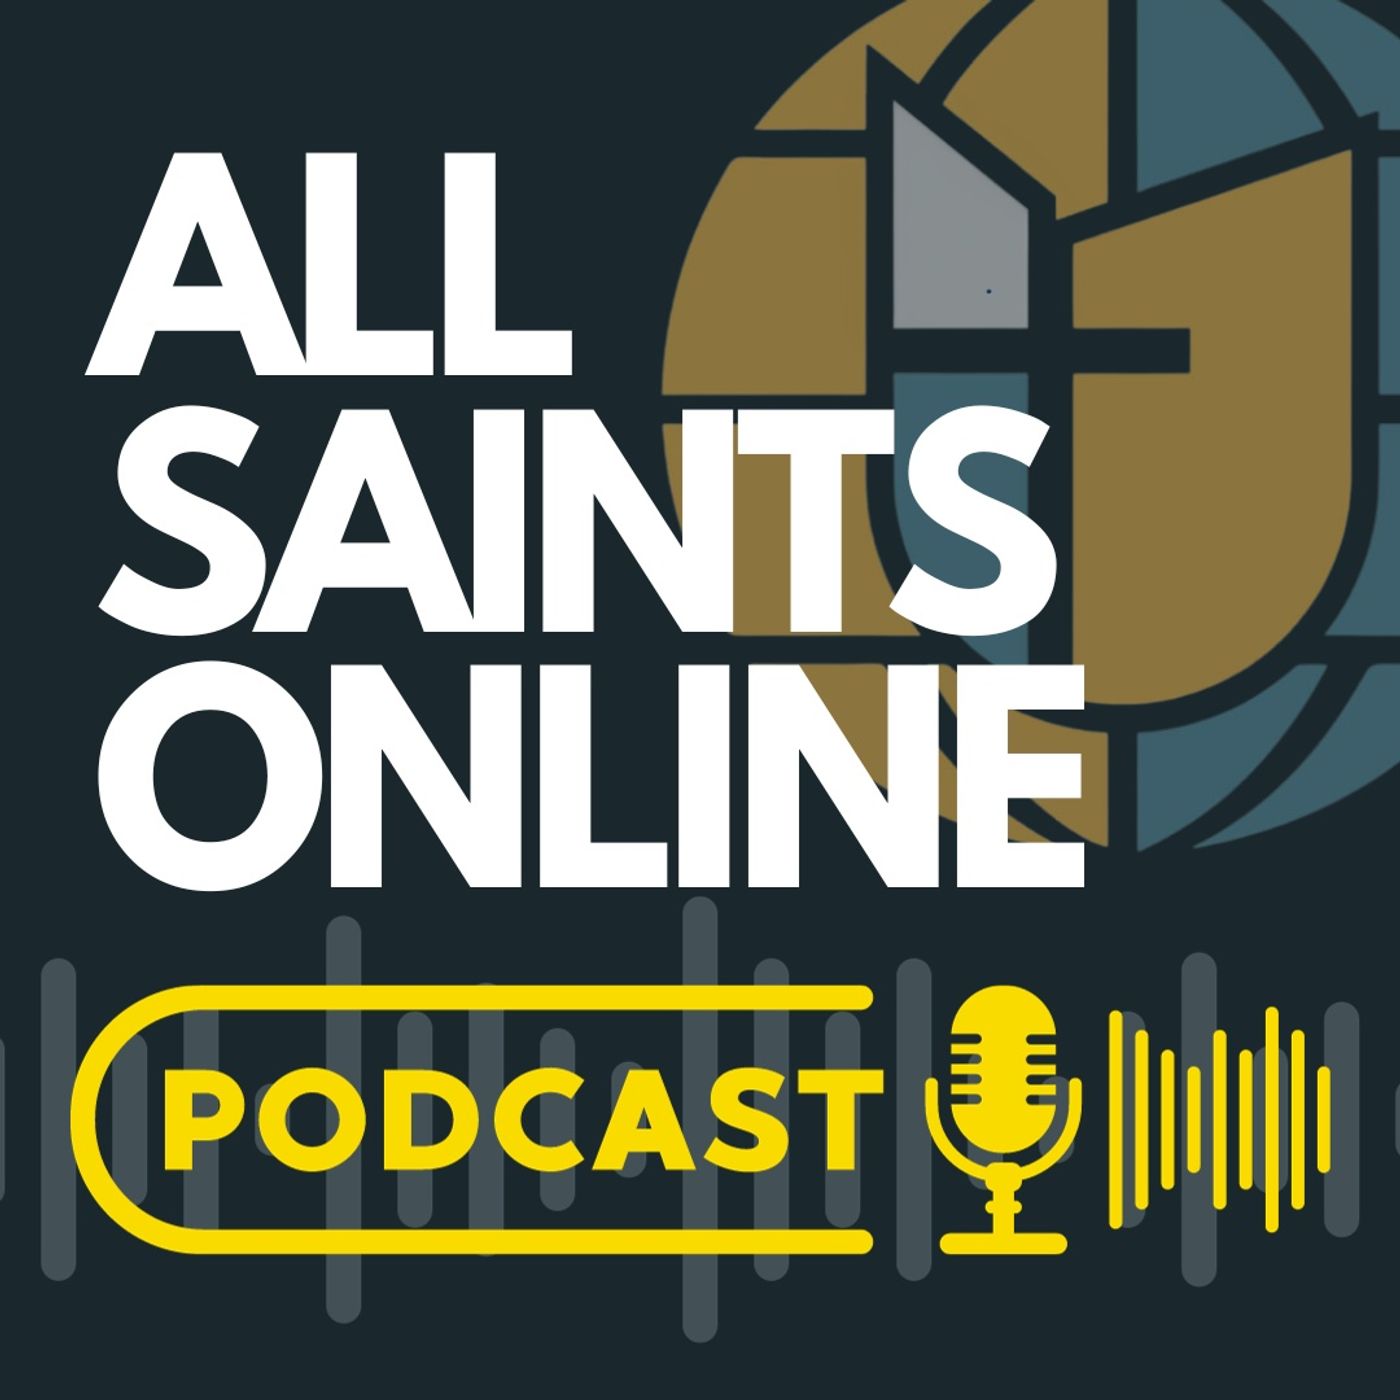 The All Saints Online Podcast